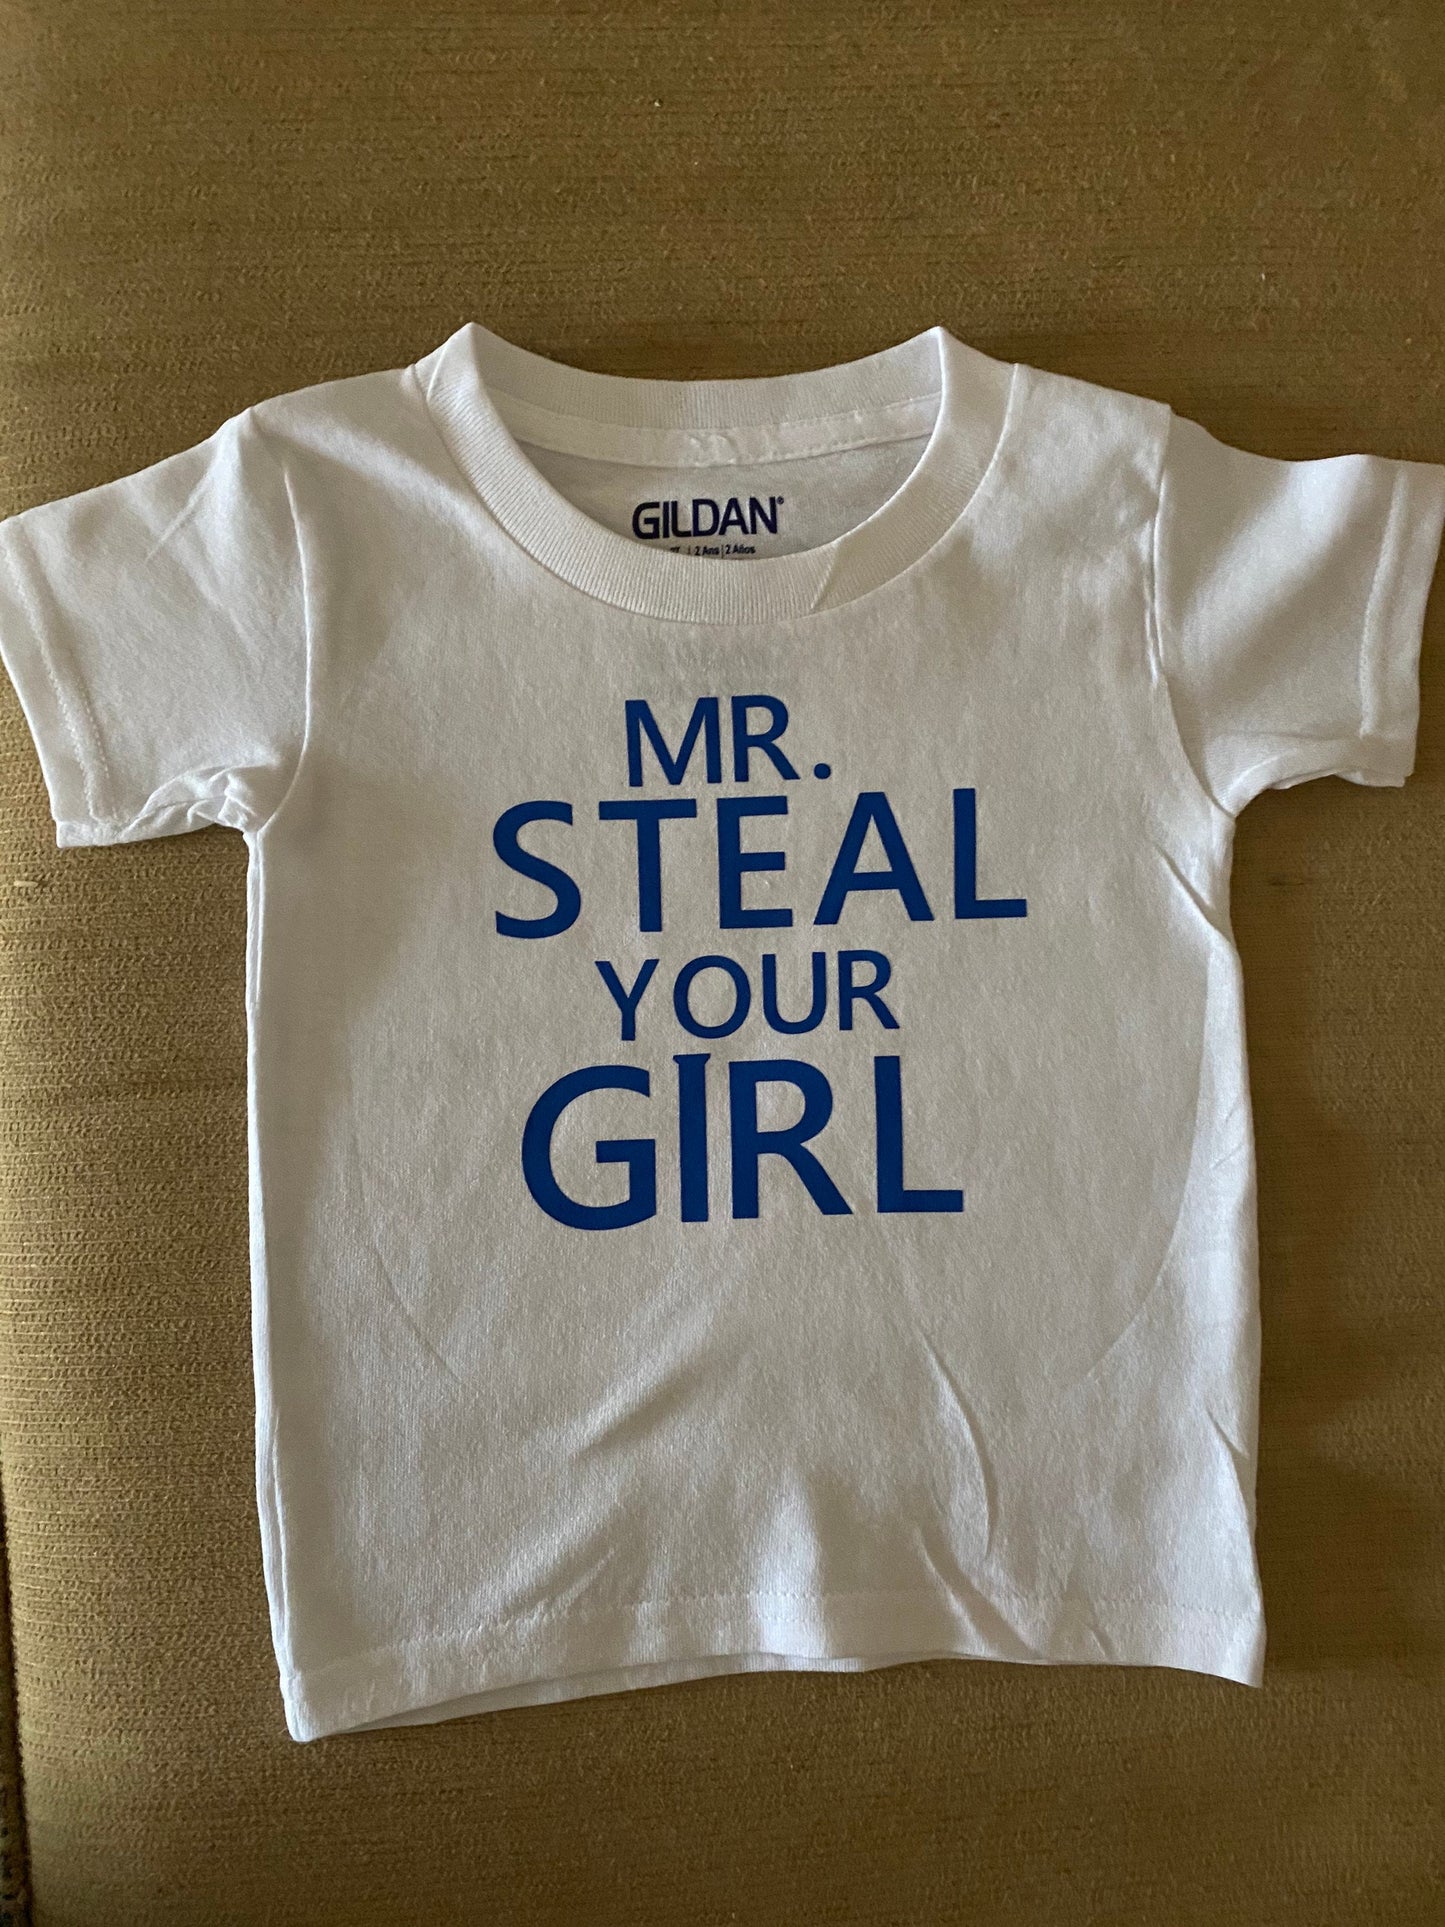 Mr. Steal Your Girl funny kids shirt toddler infant teen most popular best selling gift present birthday graphic tee